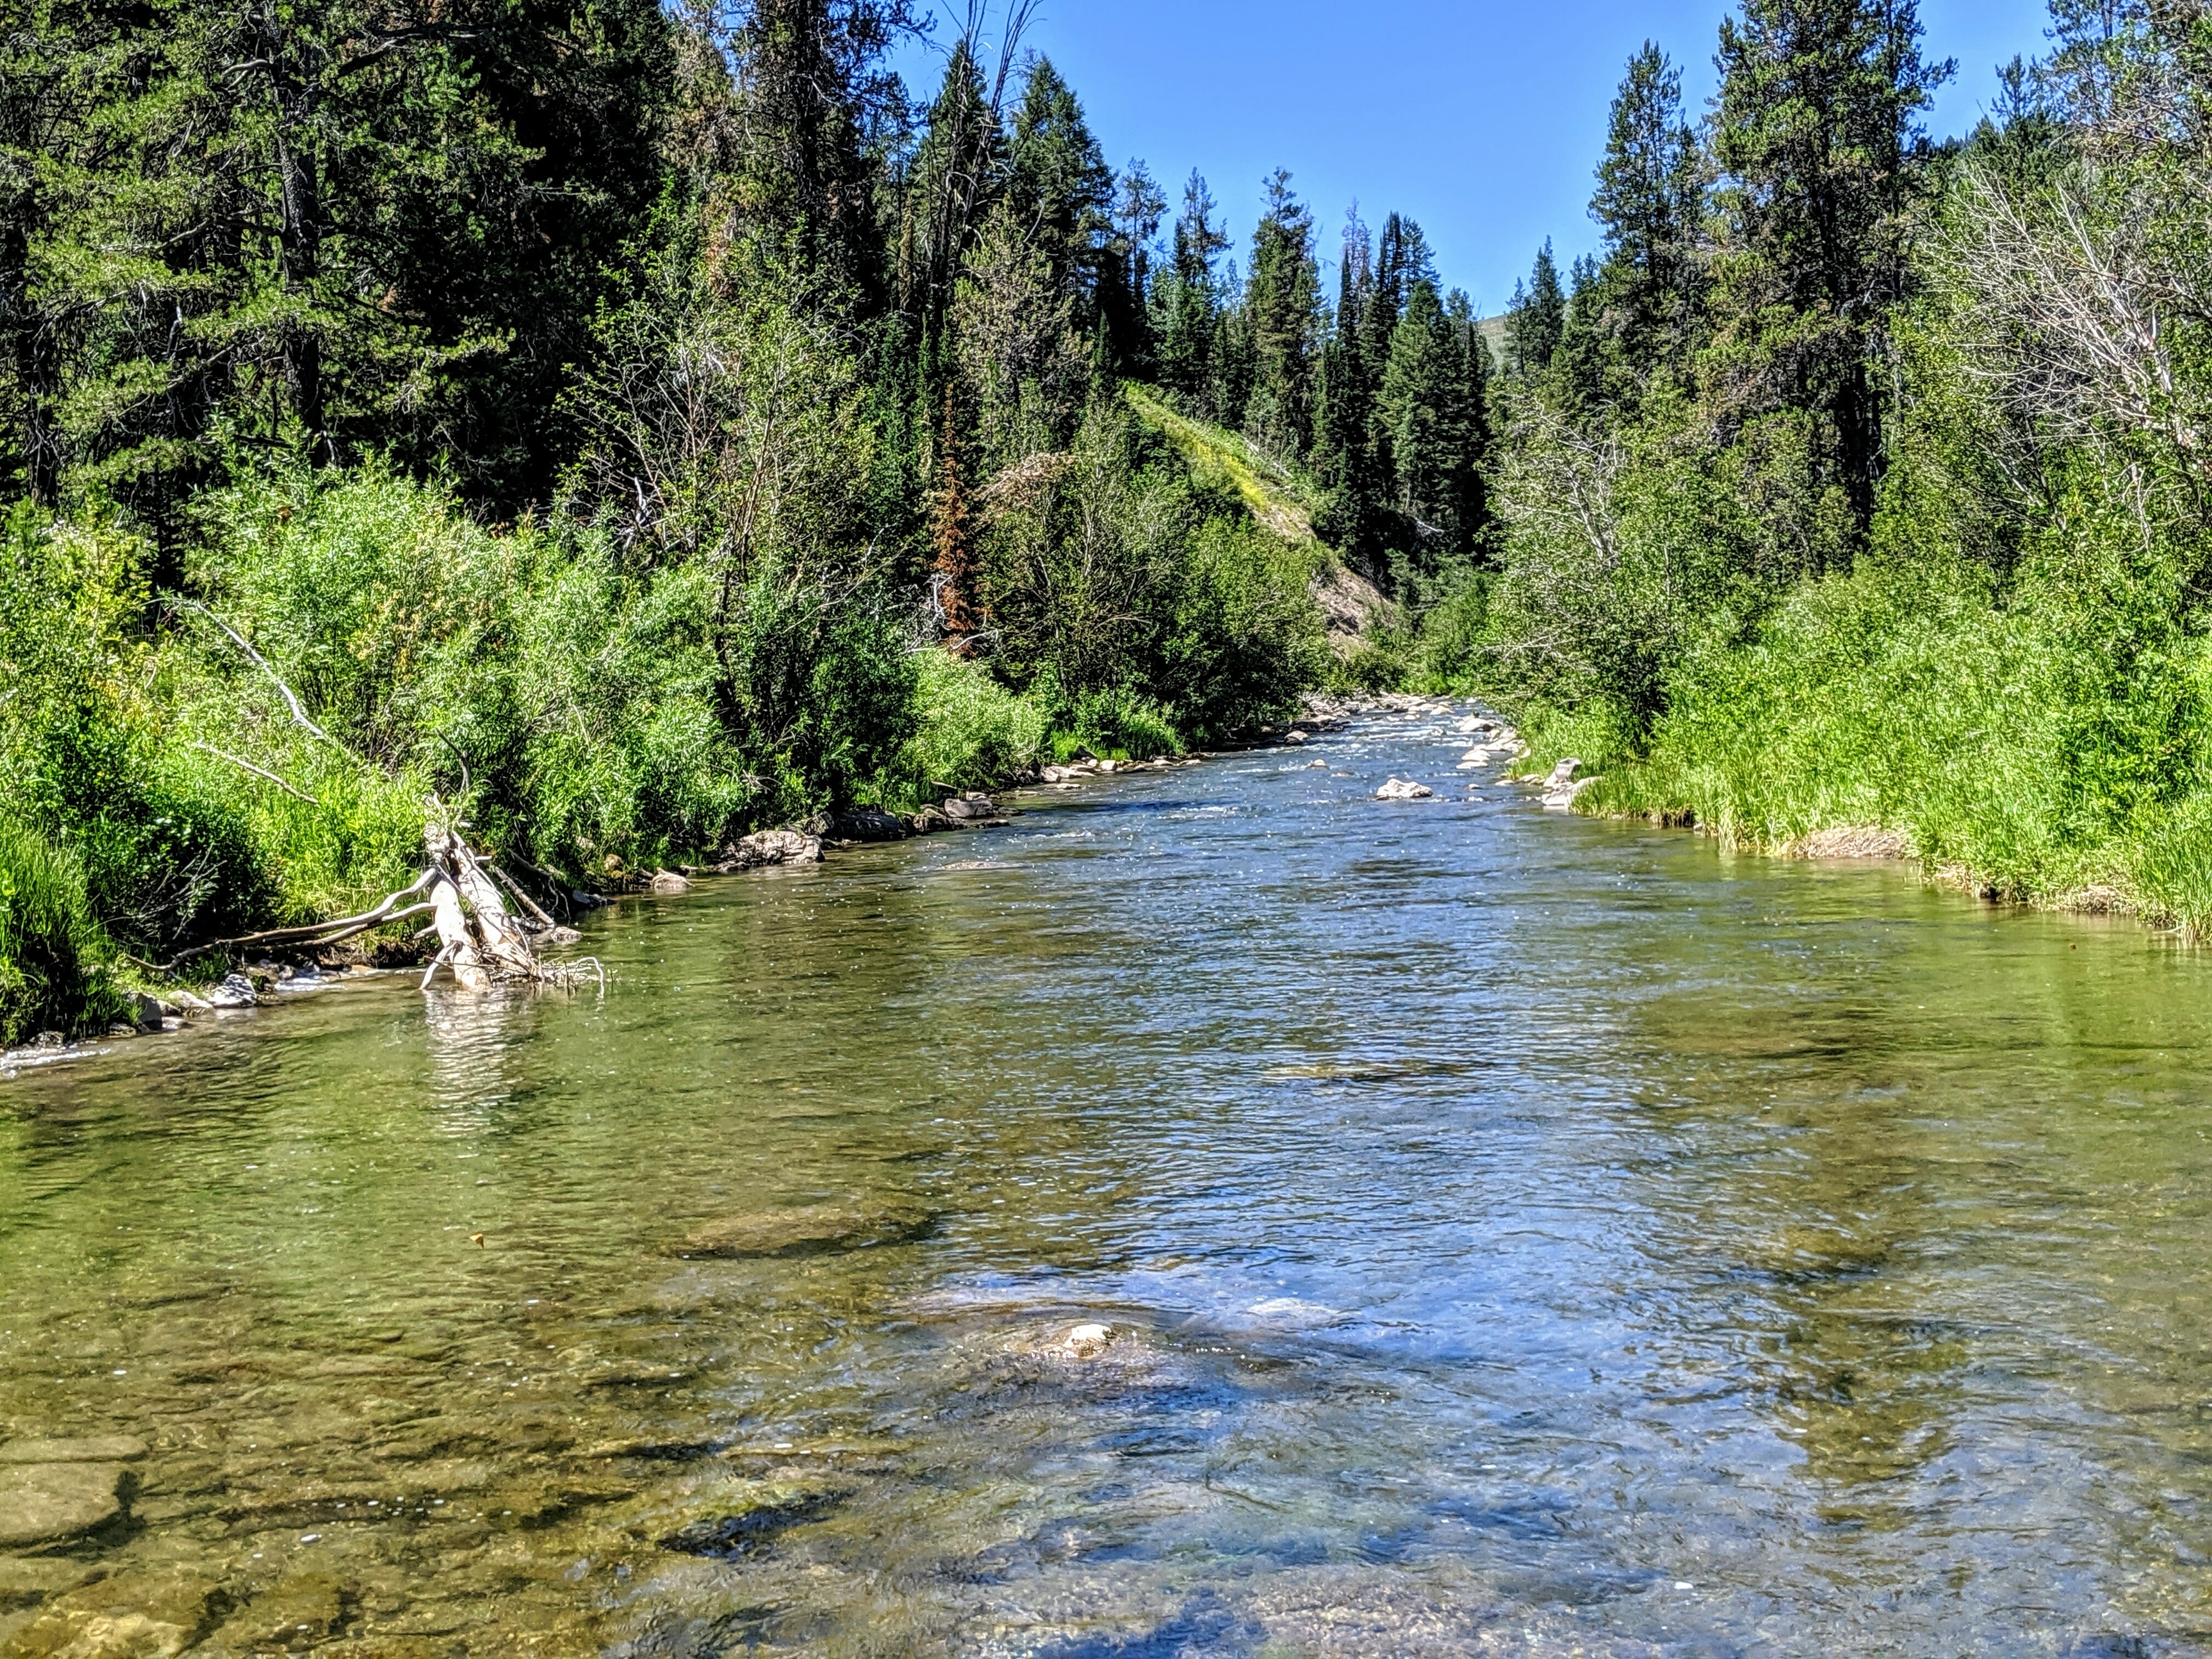 A scenic shot of a trout stream.